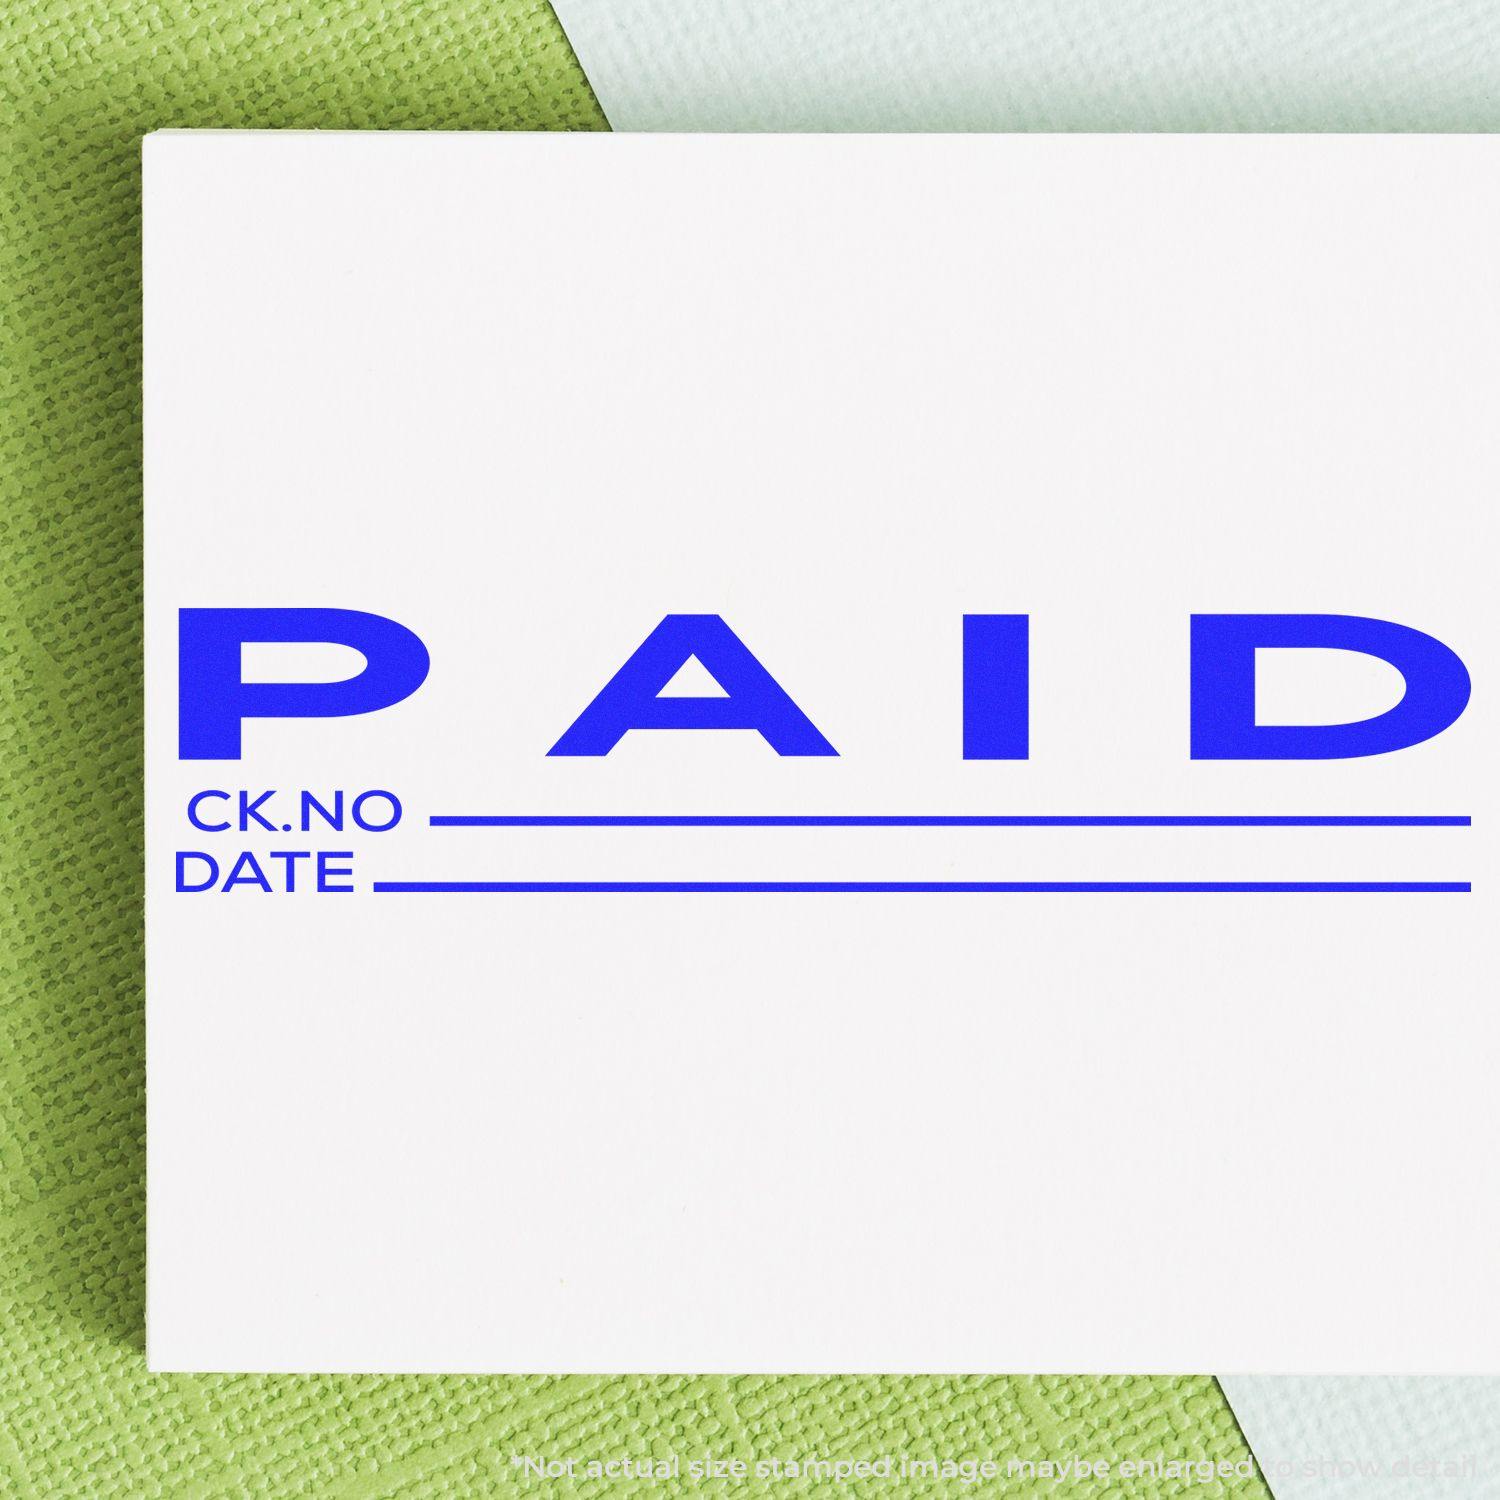 A stock office rubber stamp with a stamped image showing how the text "PAID" with a space to write down the check number and date of payment is displayed after stamping.